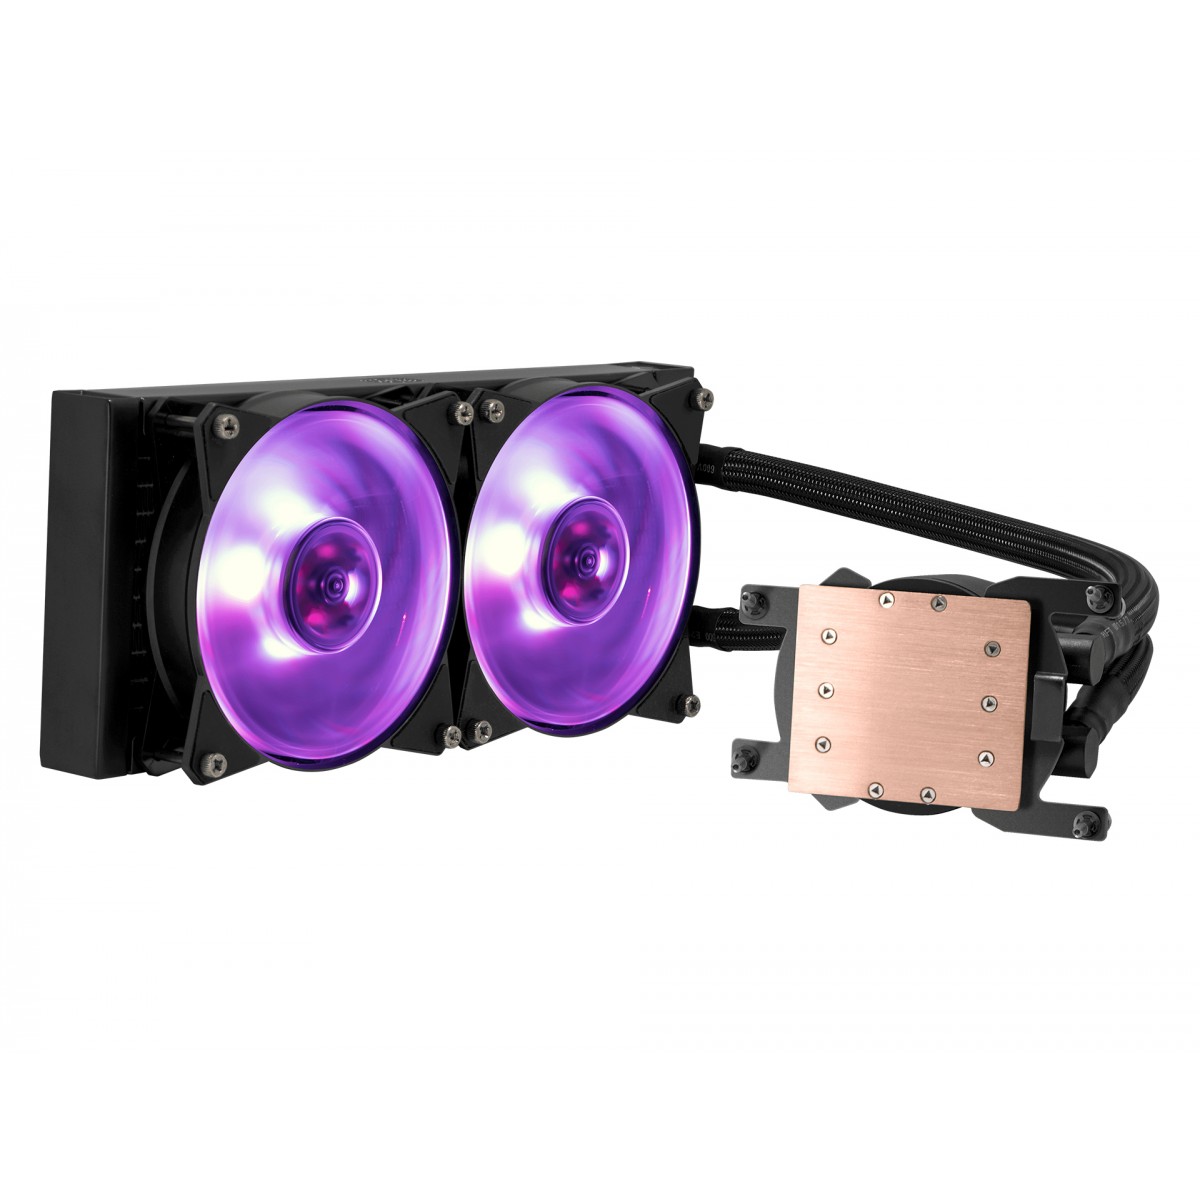 Water Cooler Cooler Master Masterliquid ML280 TR4 EDITION, 280mm, RGB, AMD, MLX-D28M-A13PC-T1